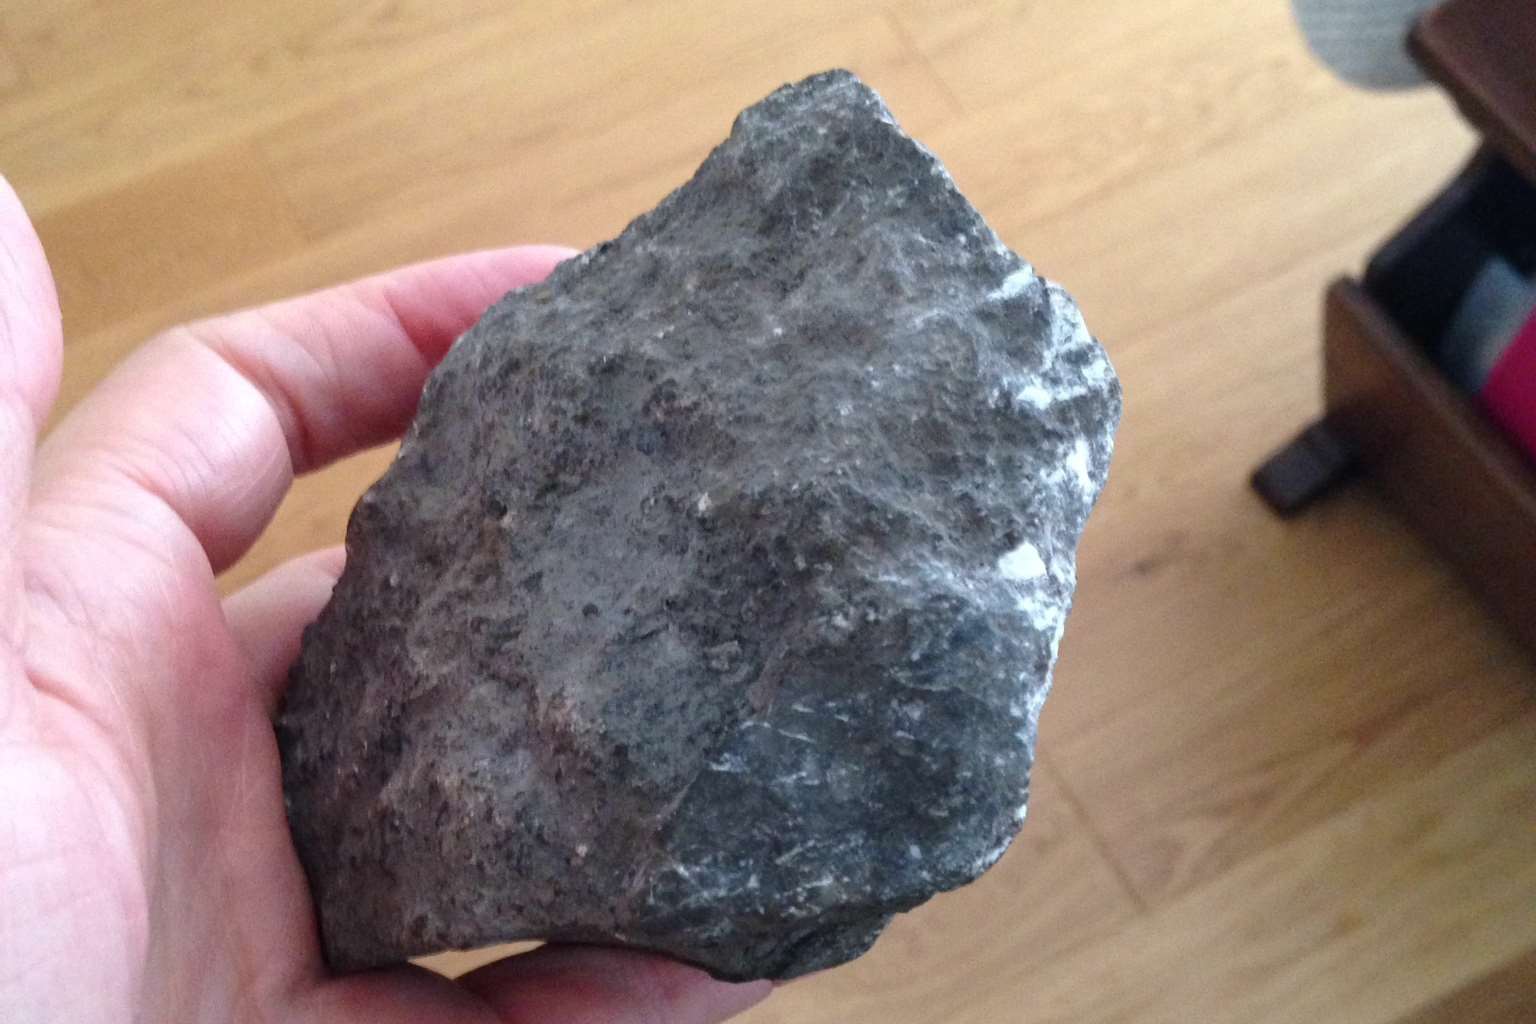 The rock that landed in Jennie Ivinson's car